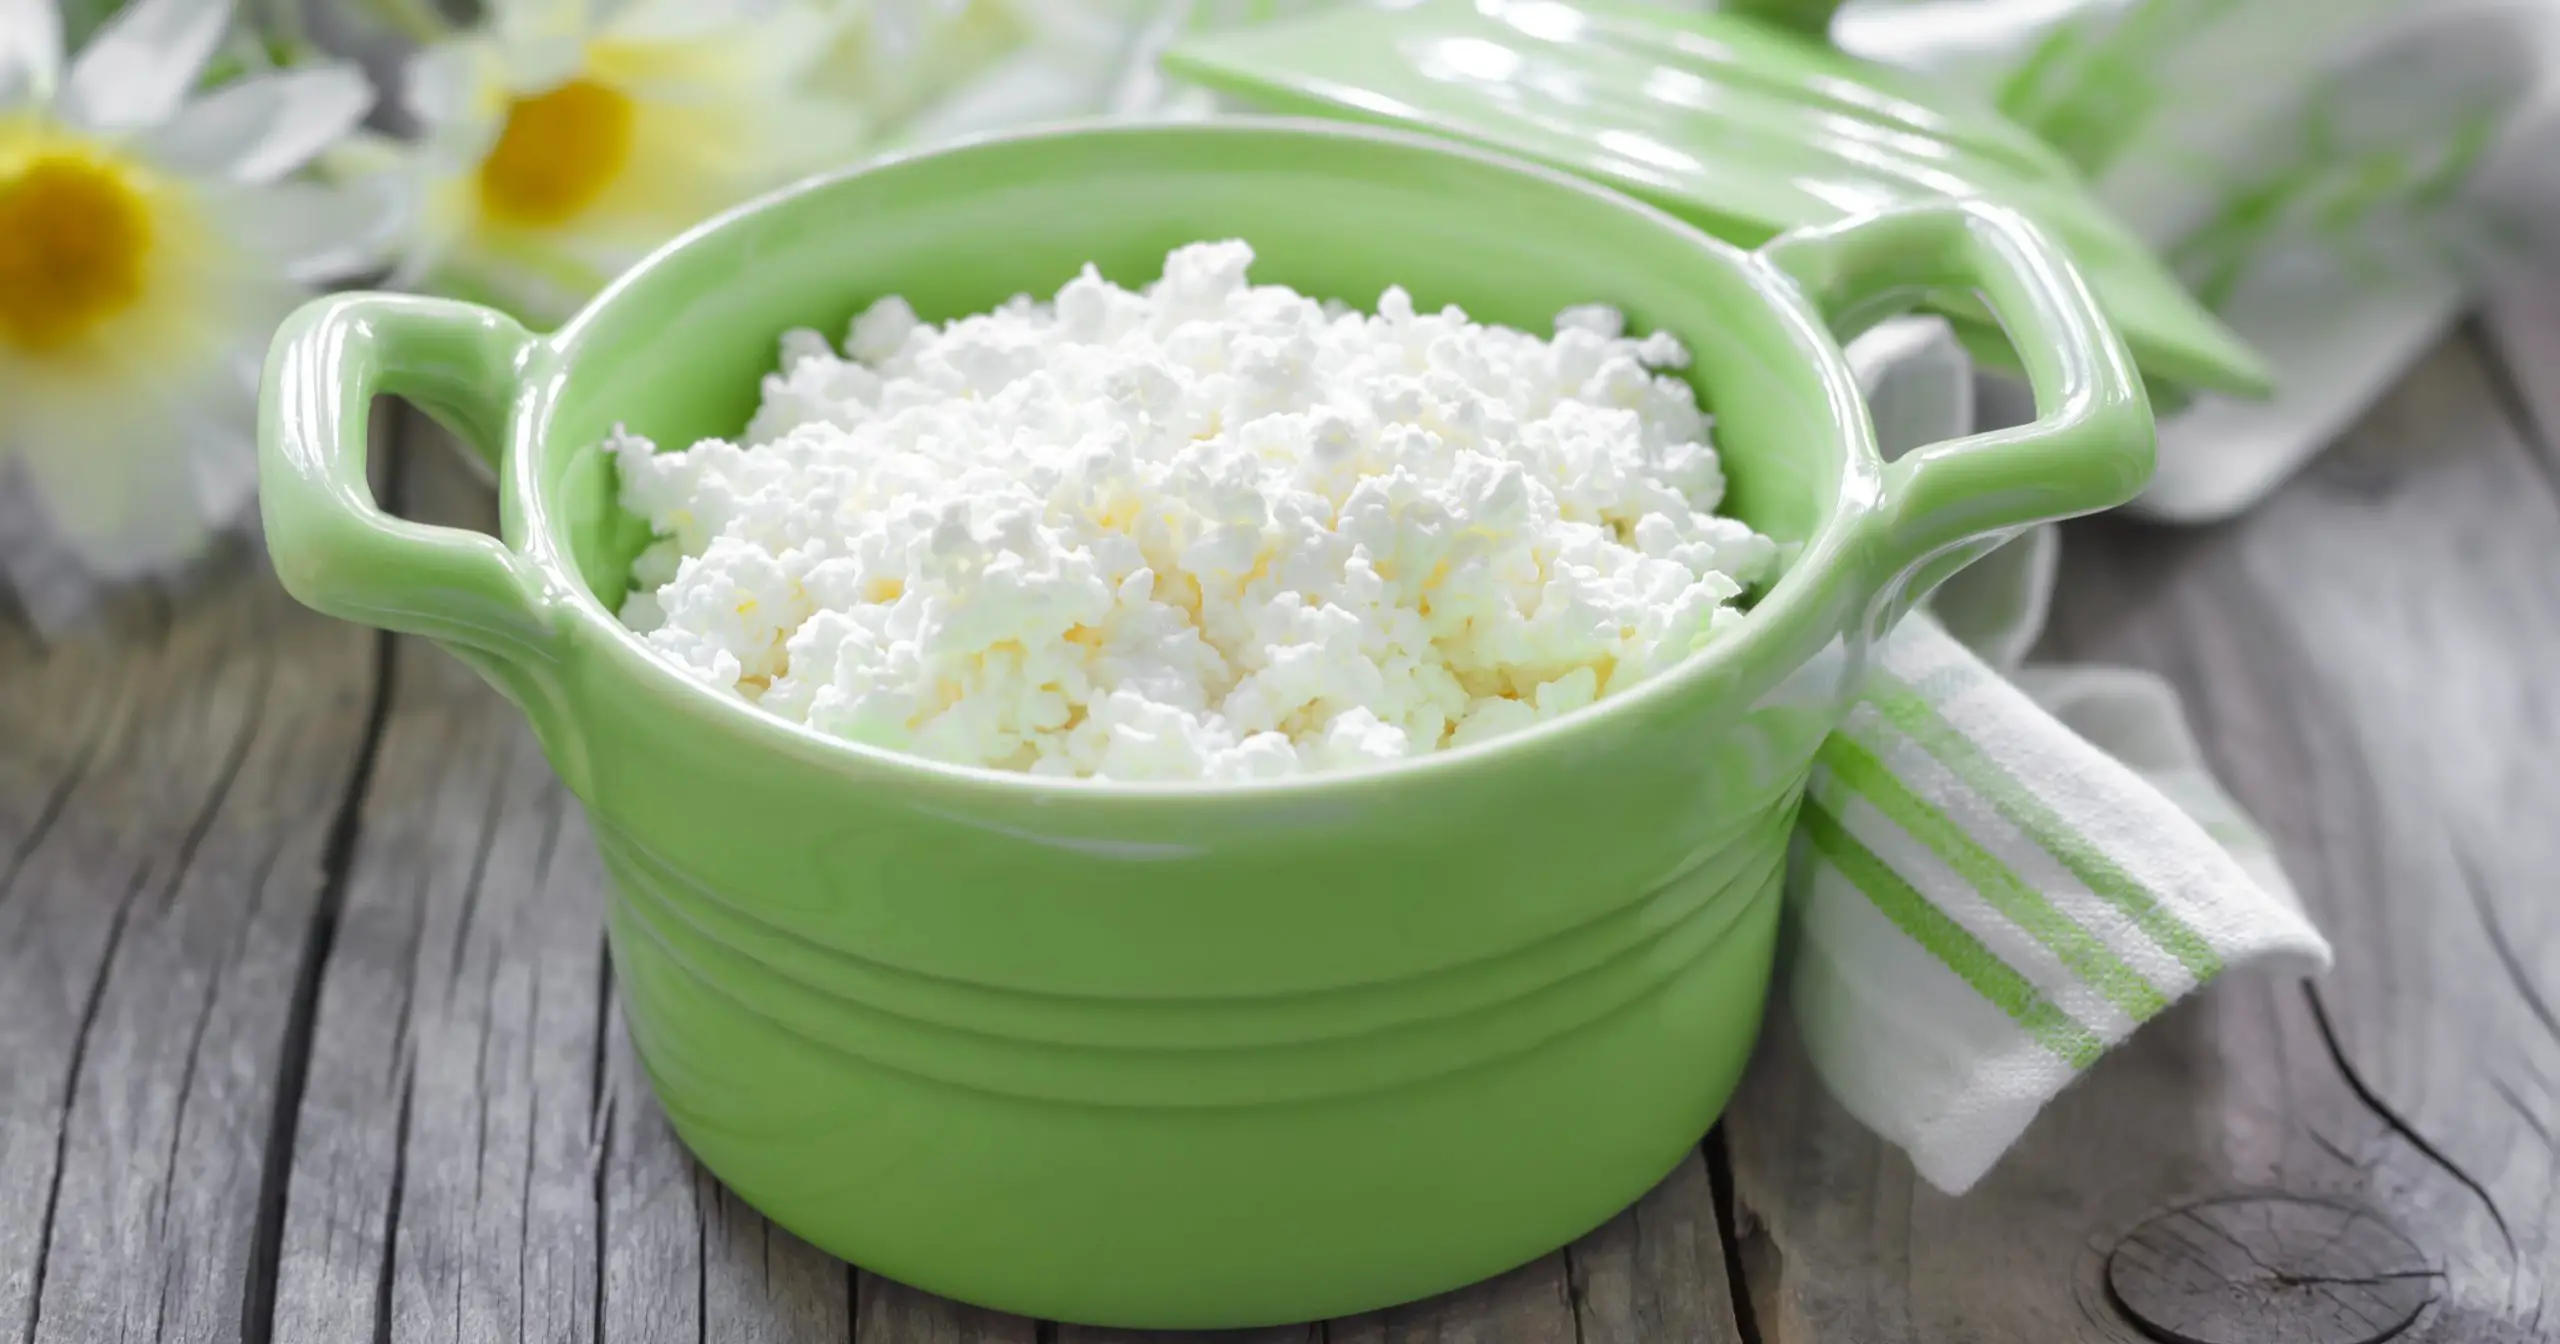 Is Cottage Cheese Keto?